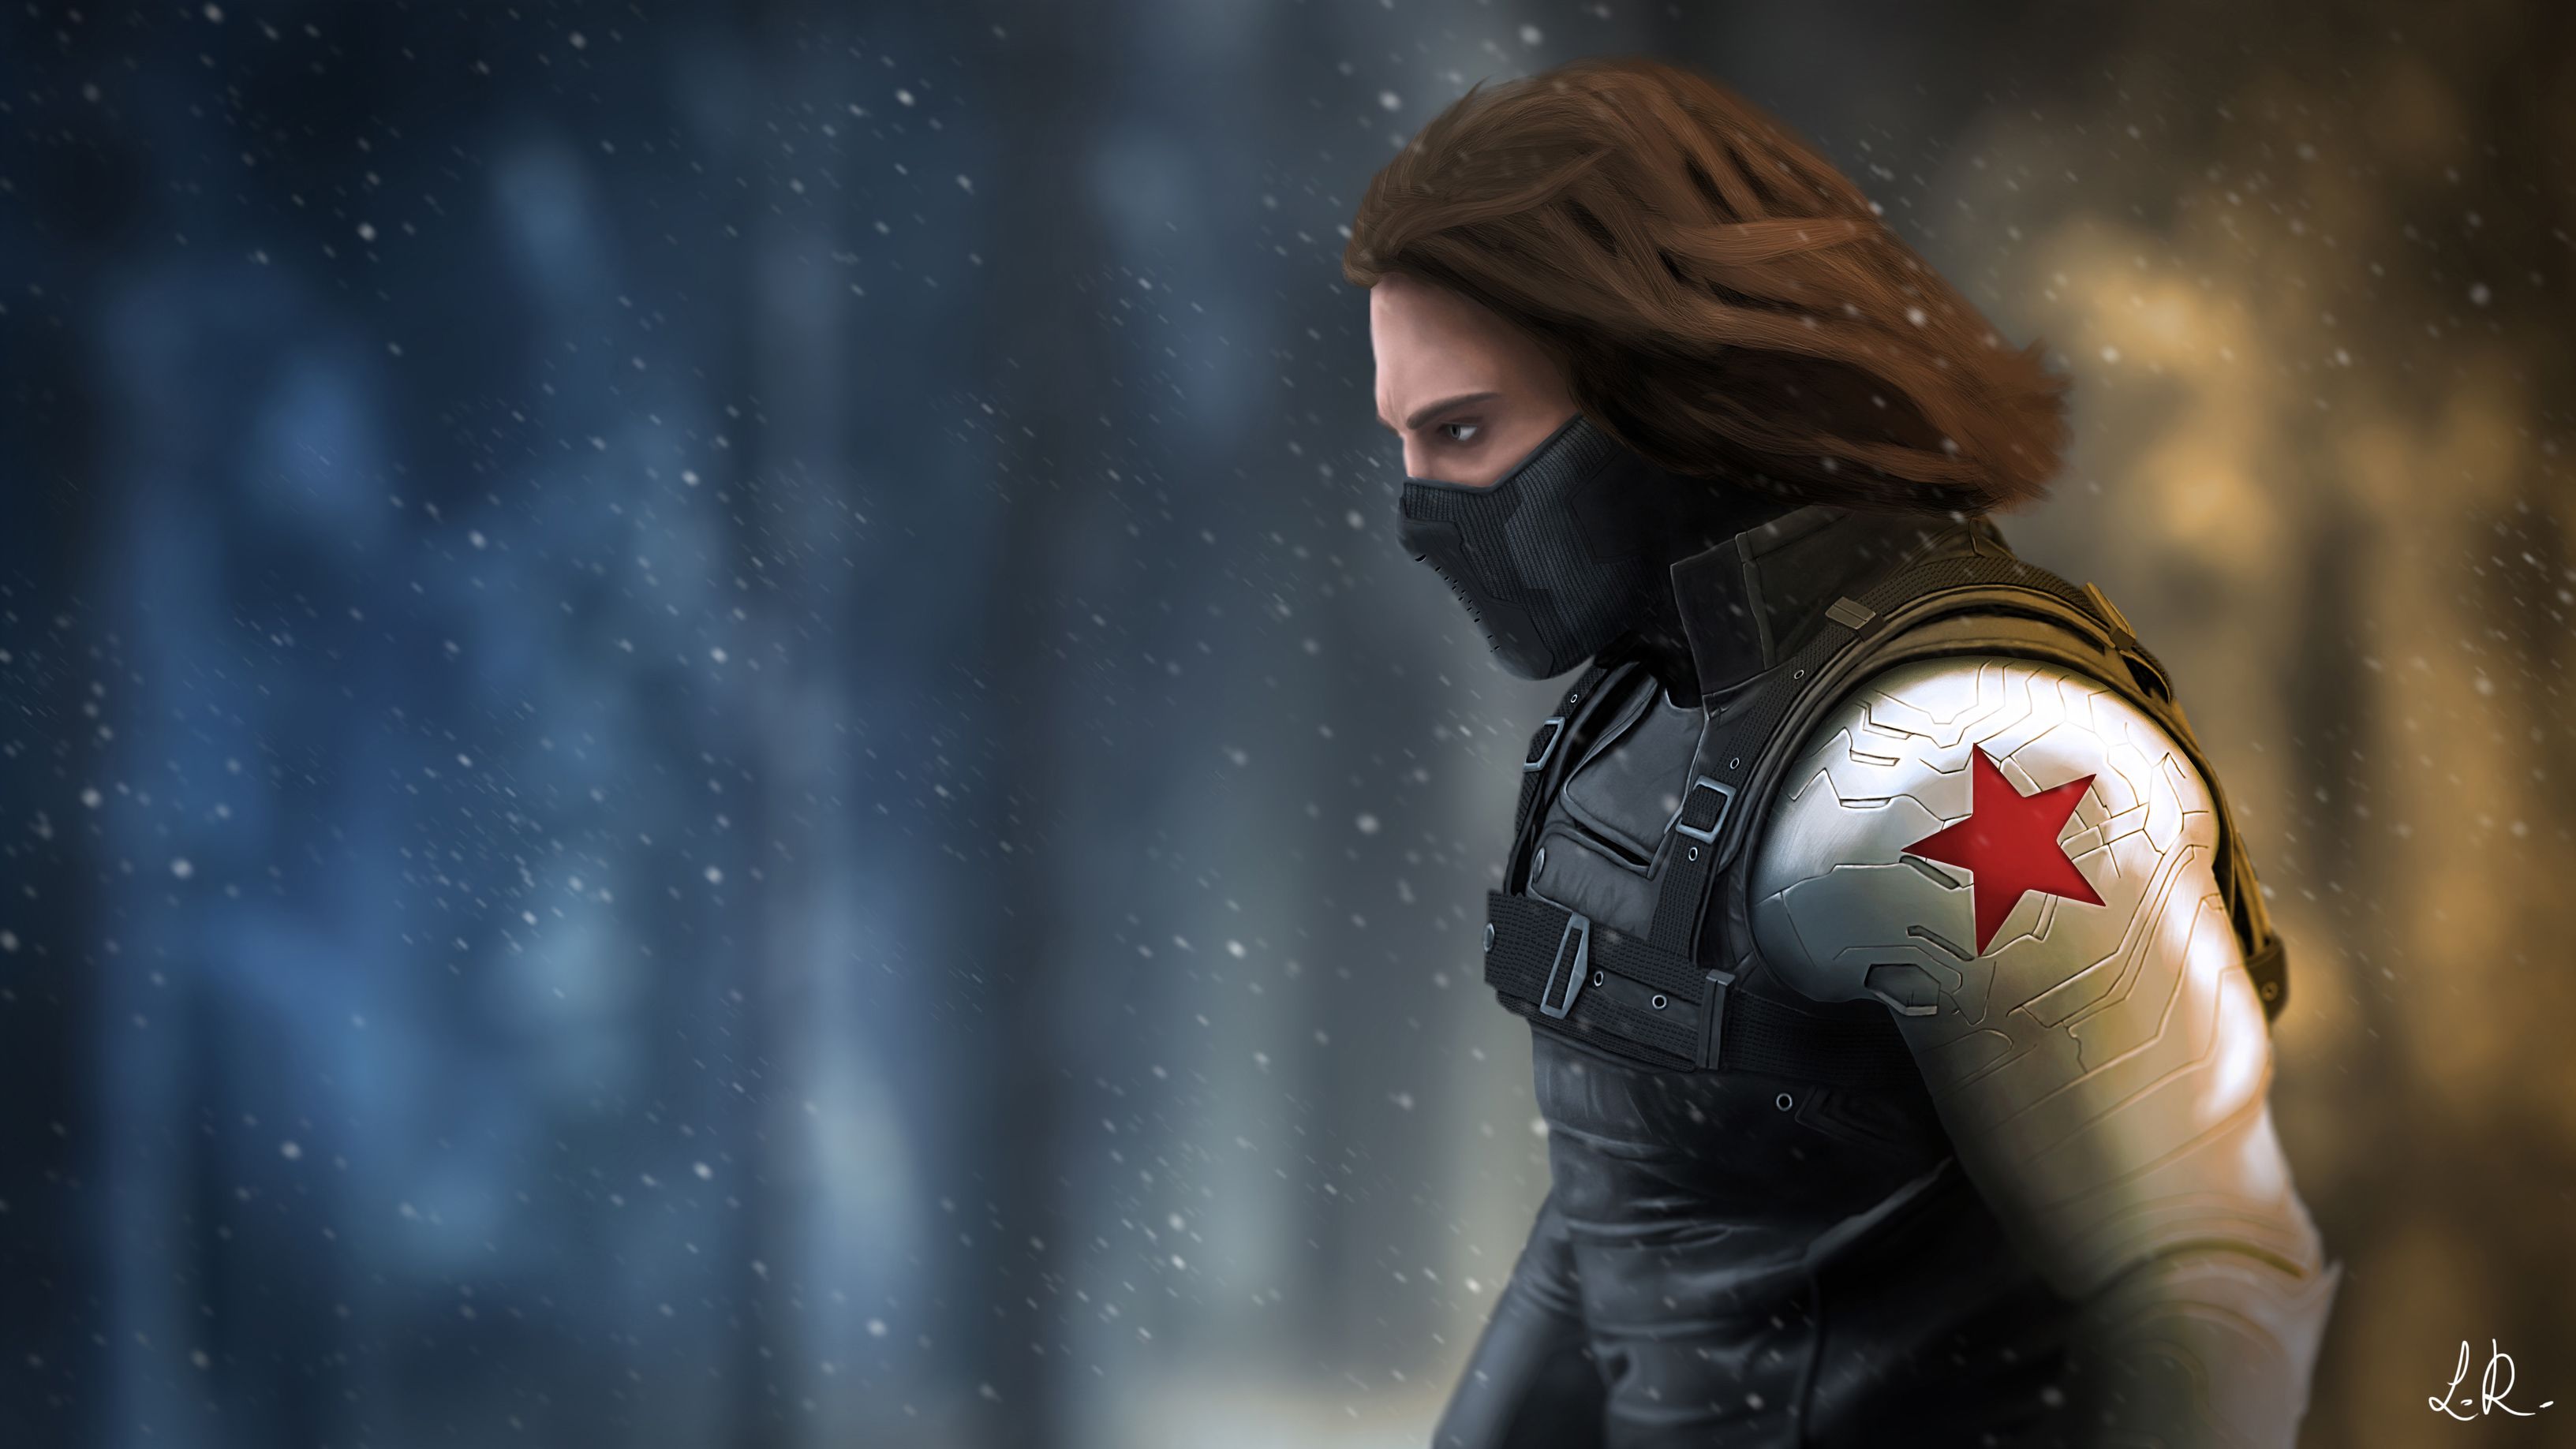 Winter Soldier Wallpapers posted by Ethan Mercado